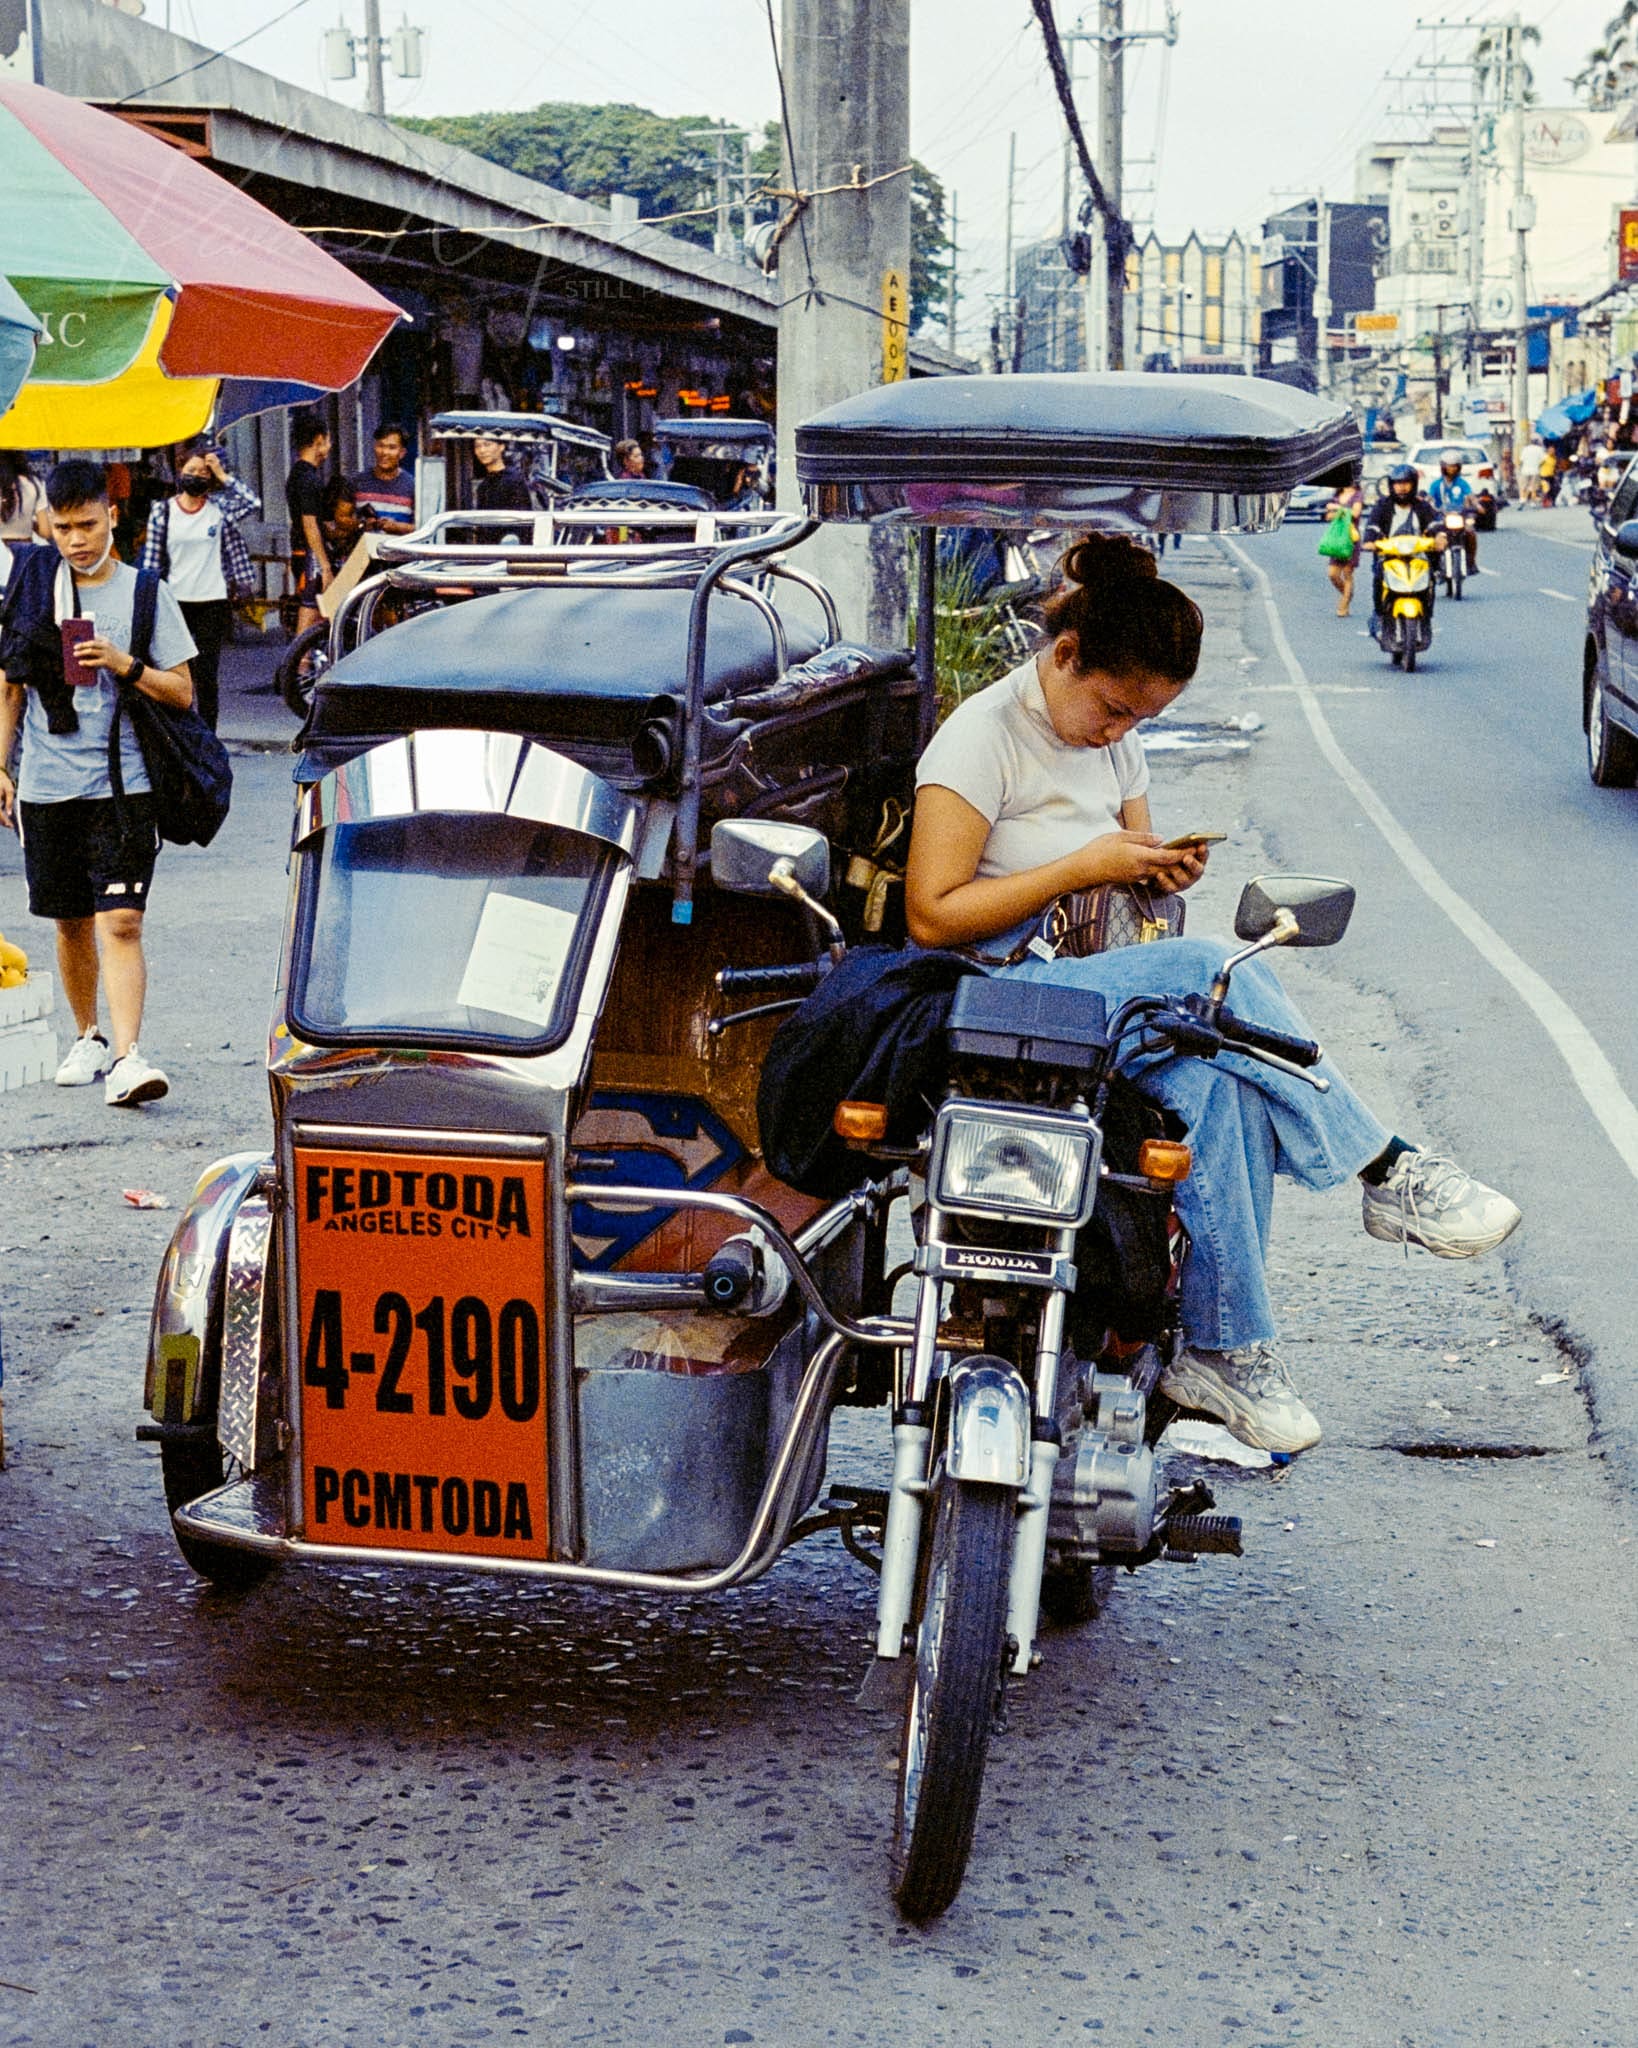 Tricycle taxi driver engrossed in mobile amidst bustling urban city life.